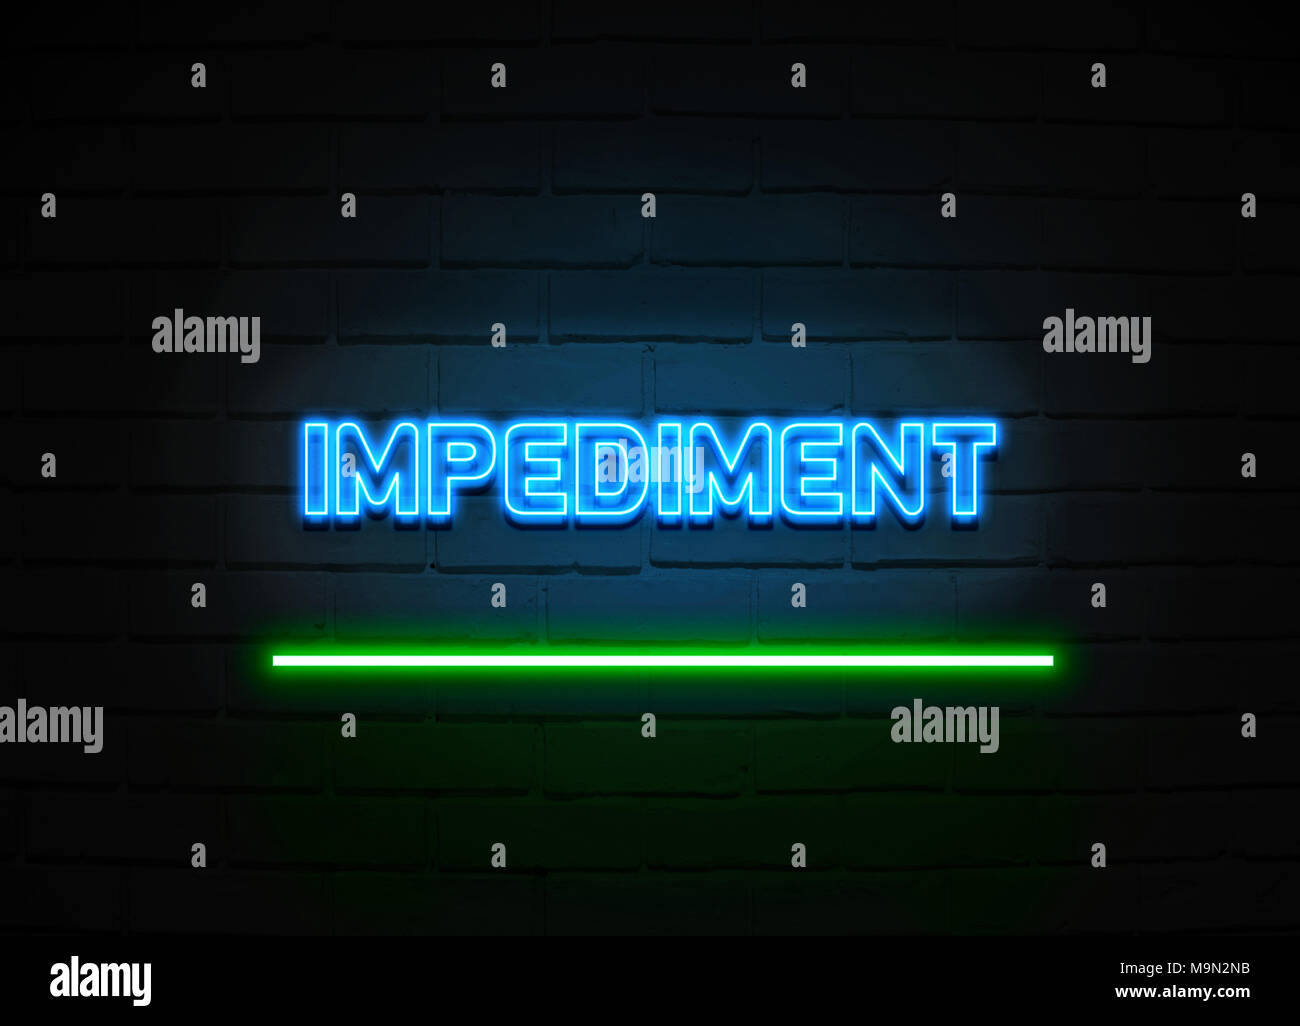 Impediment neon sign - Glowing Neon Sign on brickwall wall - 3D rendered royalty free stock illustration. Stock Photo